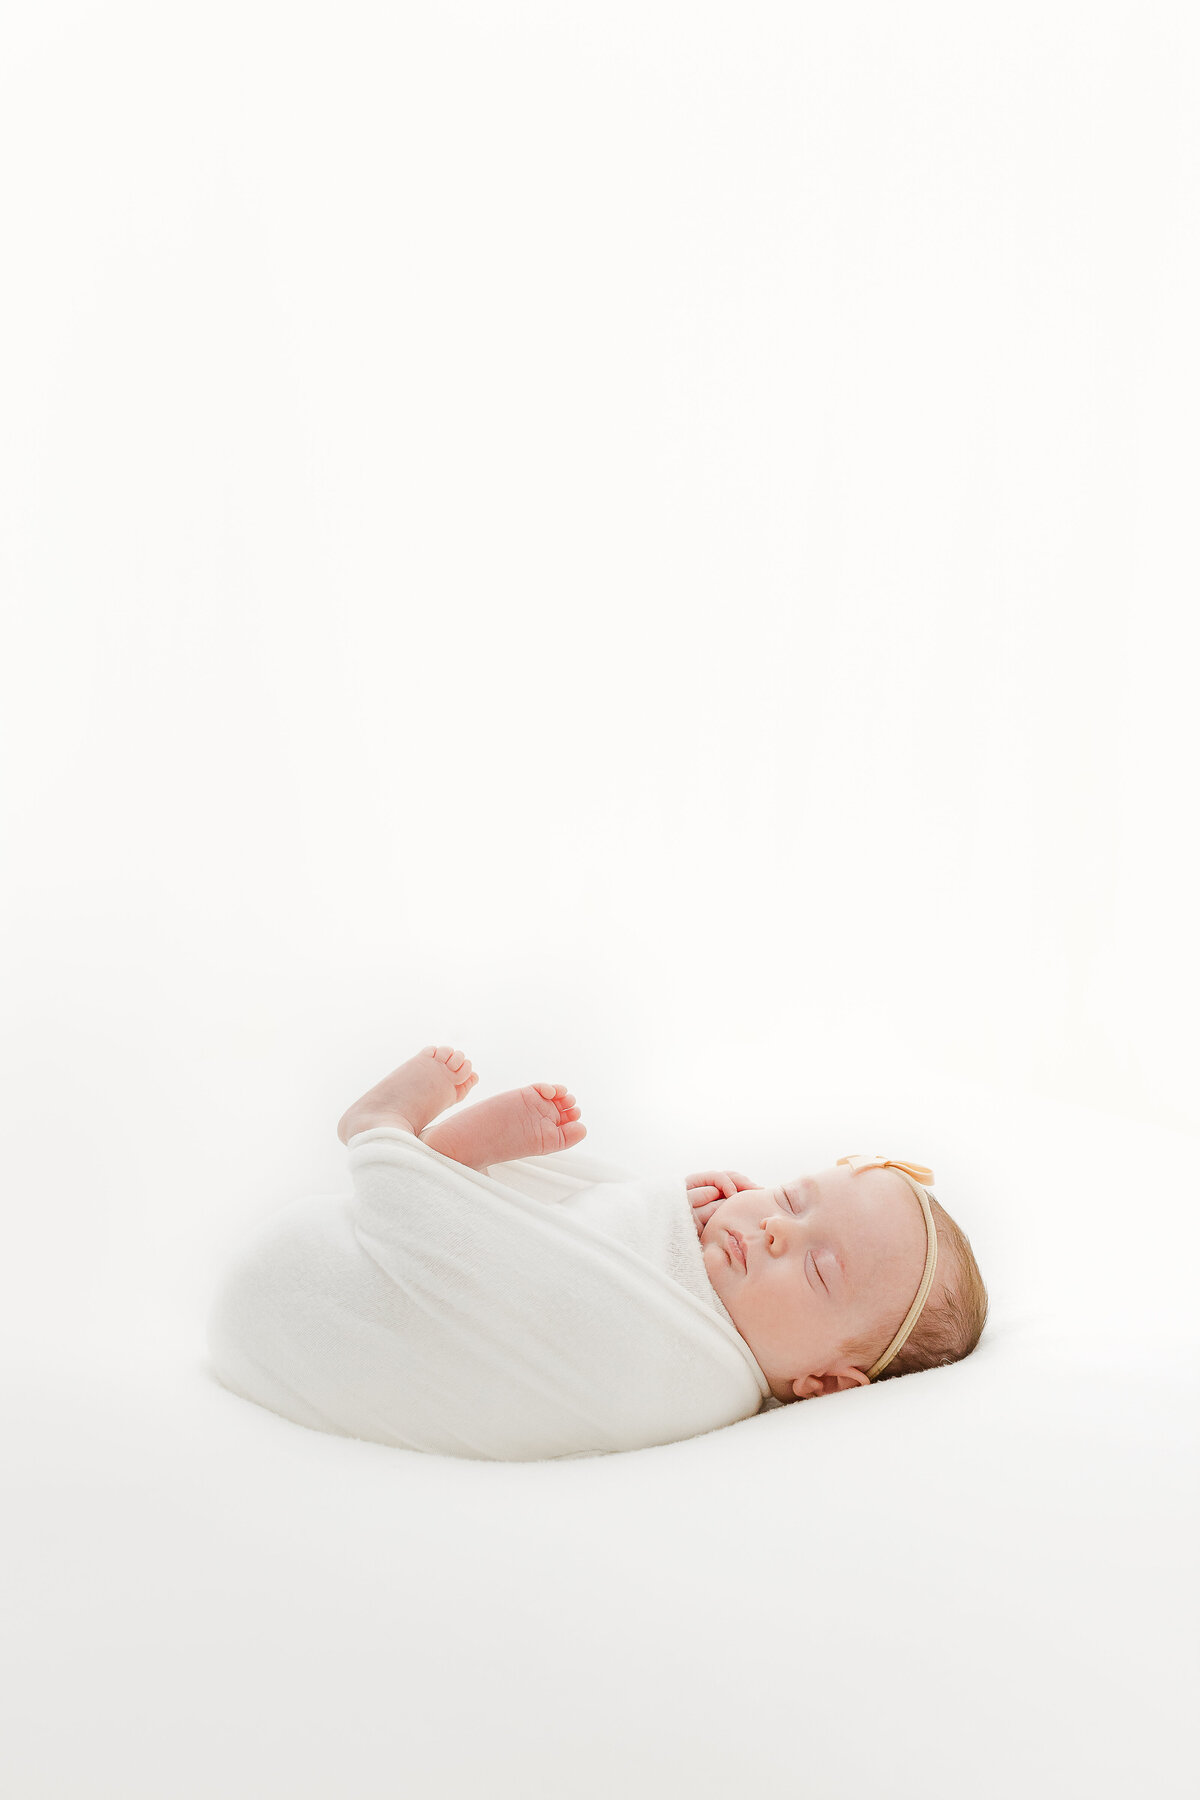 A DC Newborn Photography photo of a baby girl swaddled with her feet out on a white blanket